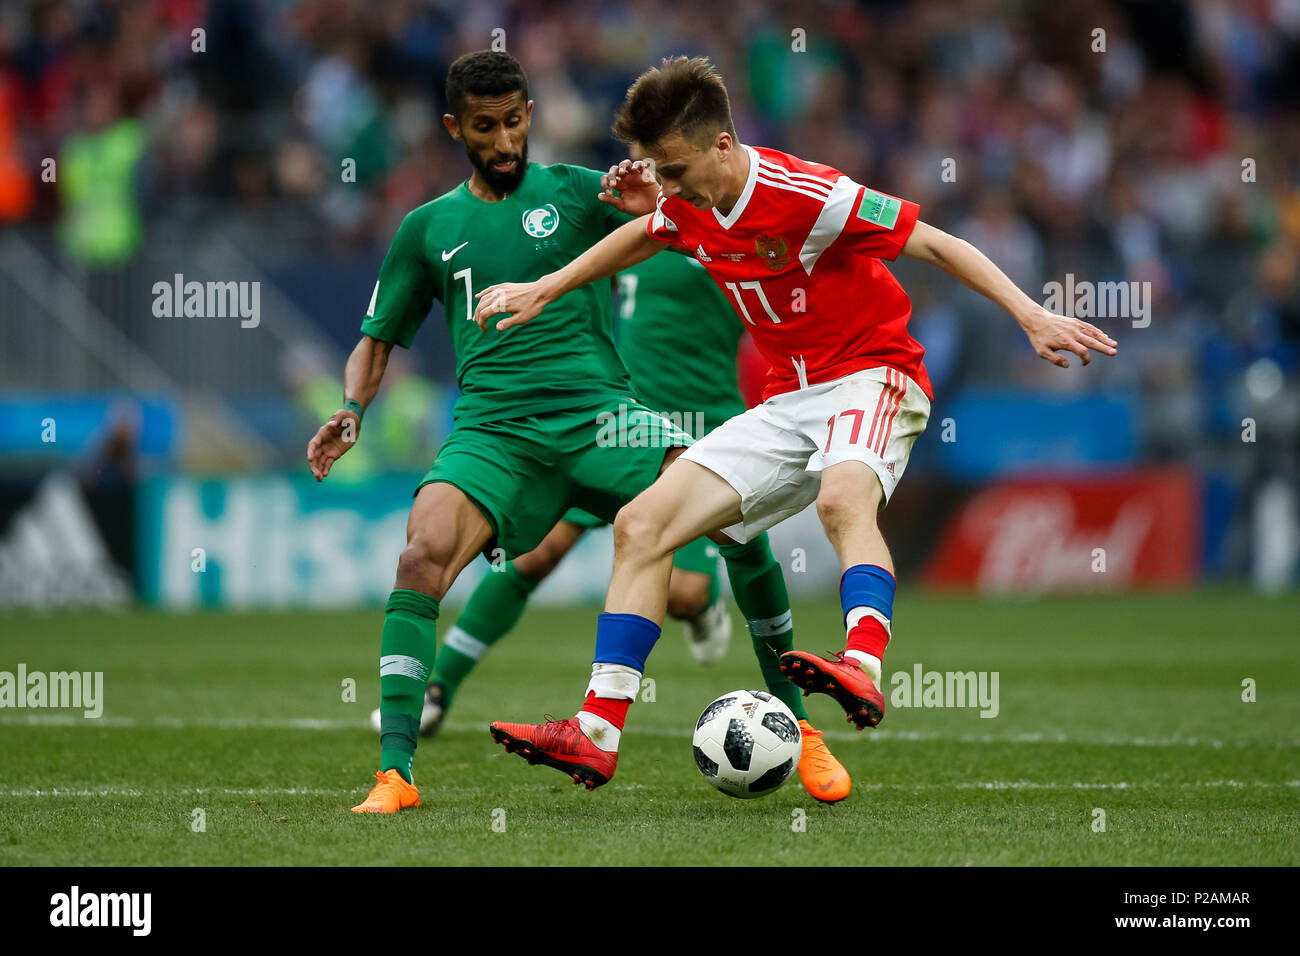 Moscow, Russia. 14th June 2018. Salman Al-Faraj of Saudi Arabia and Aleksandr Golovin of Russia during the 2018 FIFA World Cup Group A match between Russia and Saudi Arabia at Luzhniki Stadium on June 14th 2018 in Moscow, Russia. Credit: PHC Images/Alamy Live News Stock Photo